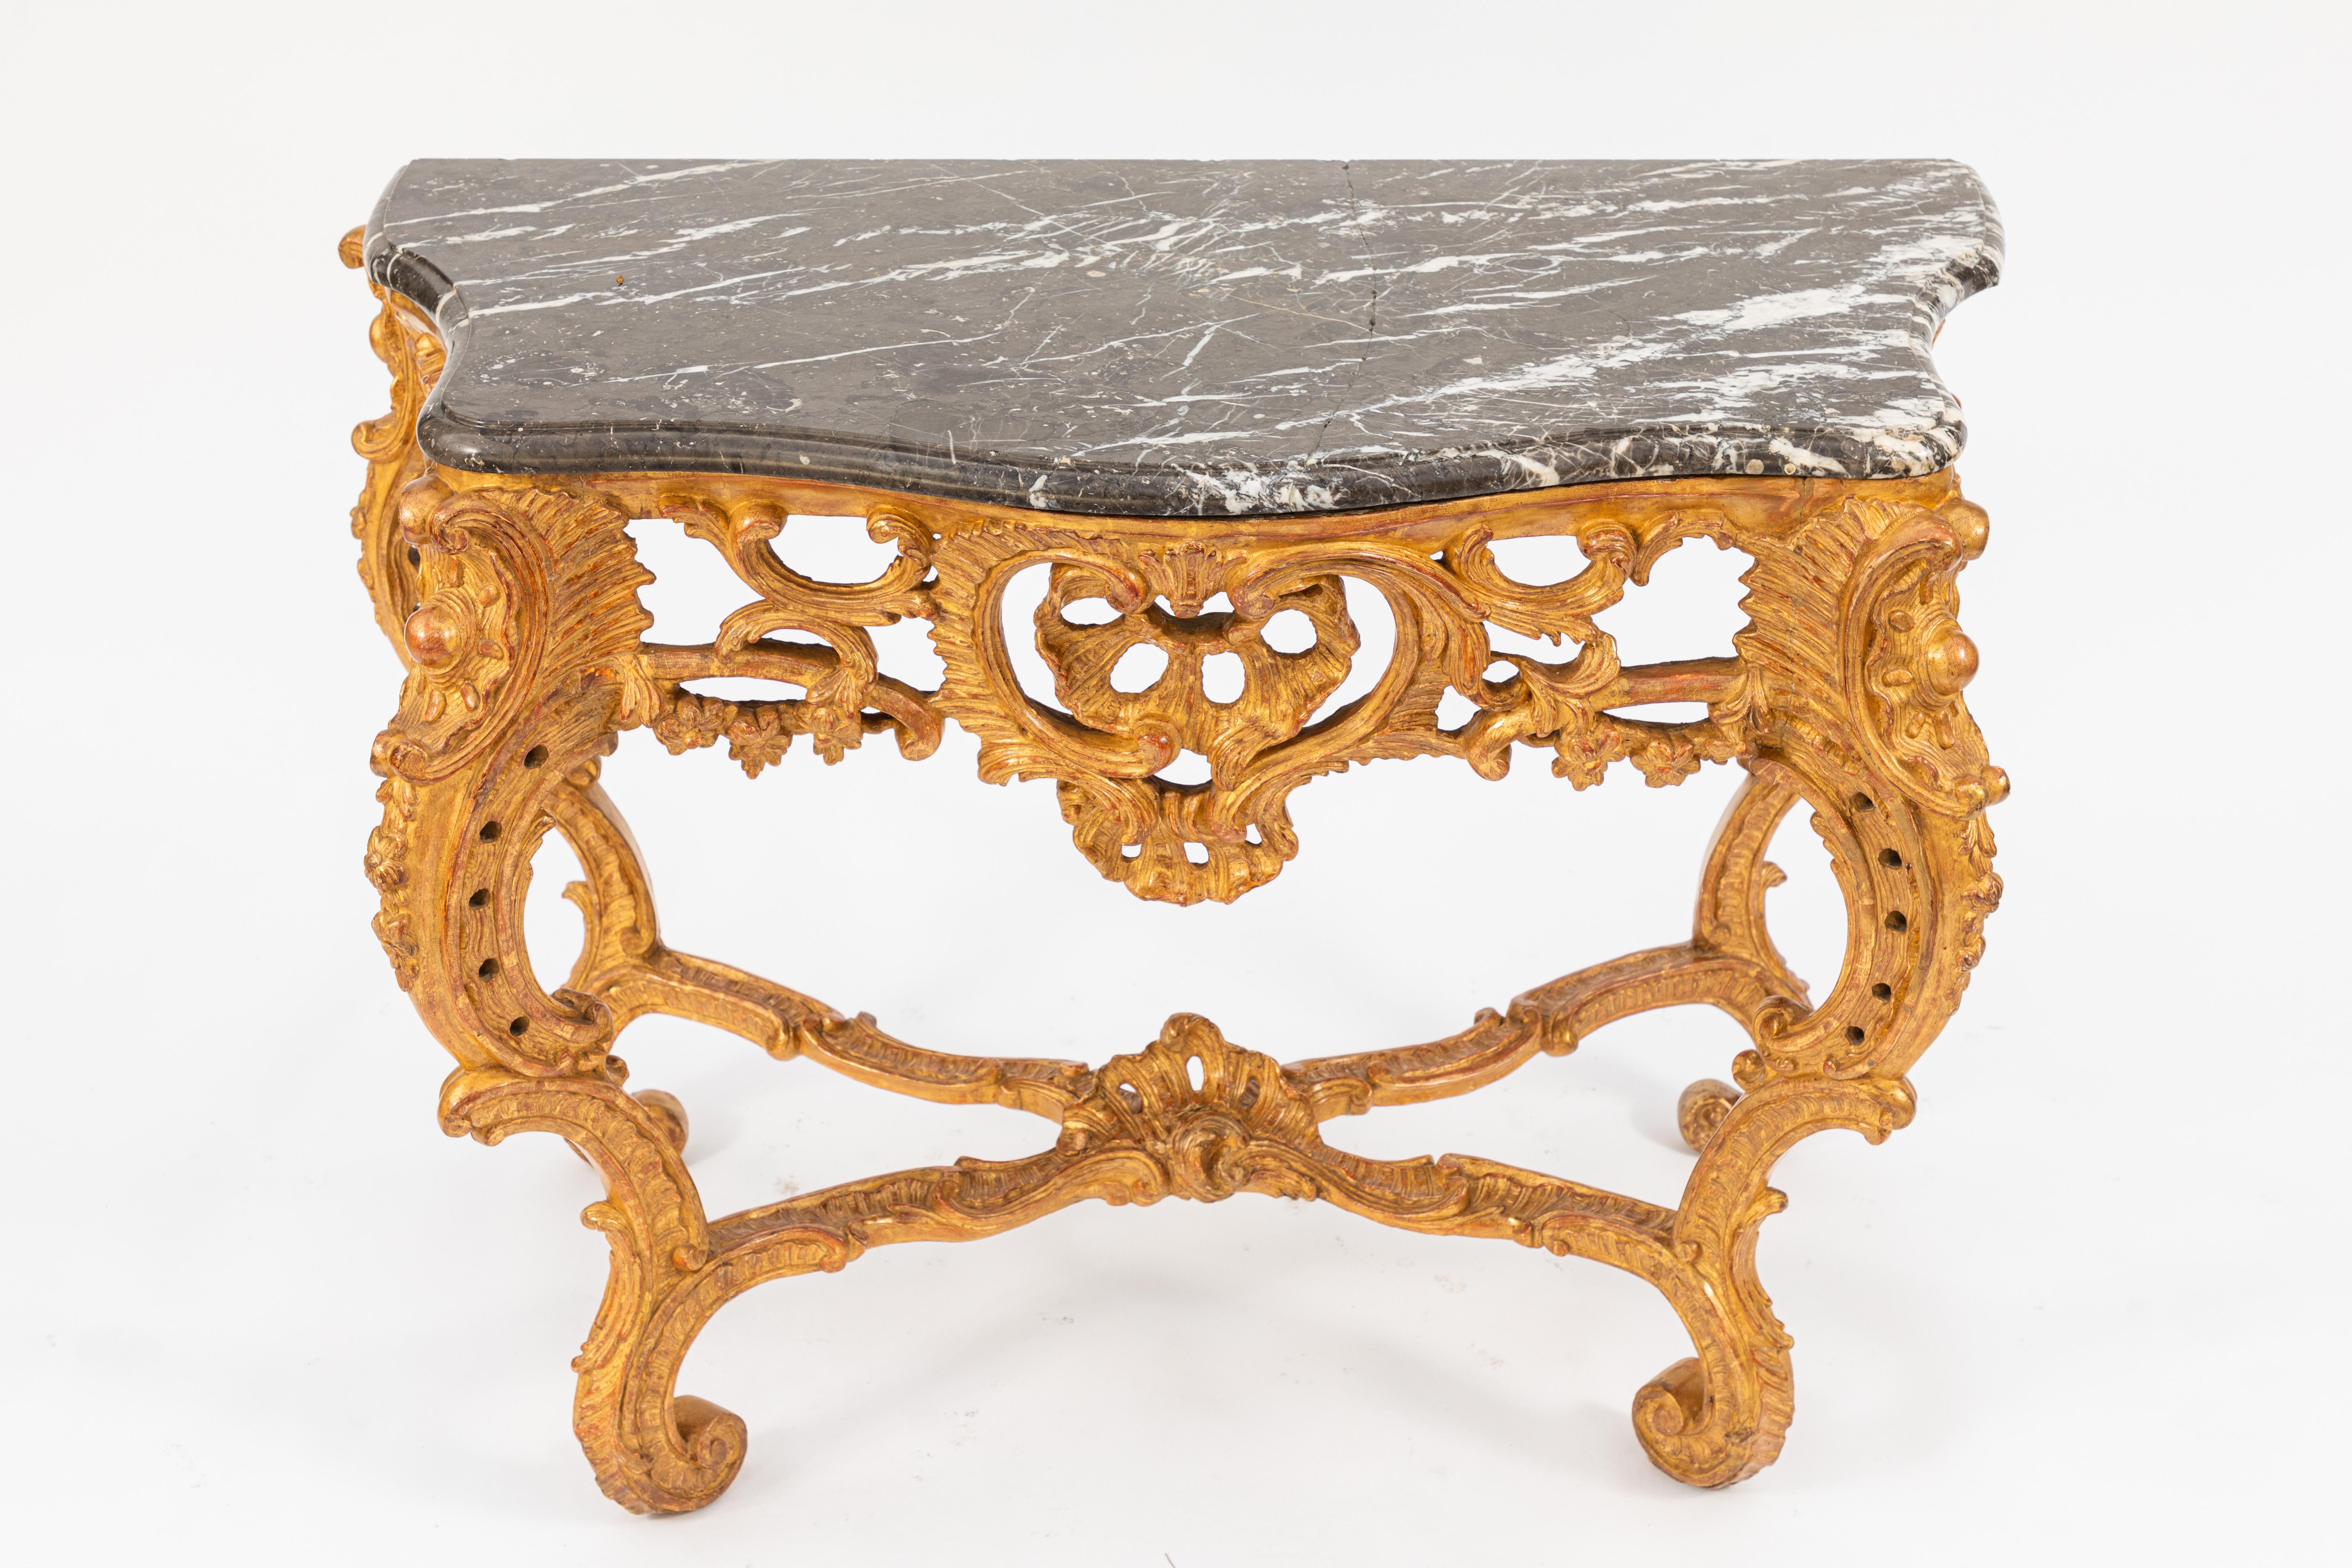 Pair of early 19th century French giltwood consoles with marble tops. The marble tops are believed to be original as the backs are hand chiseled. One marble top has a repair. These consoles were purchased at Christies.